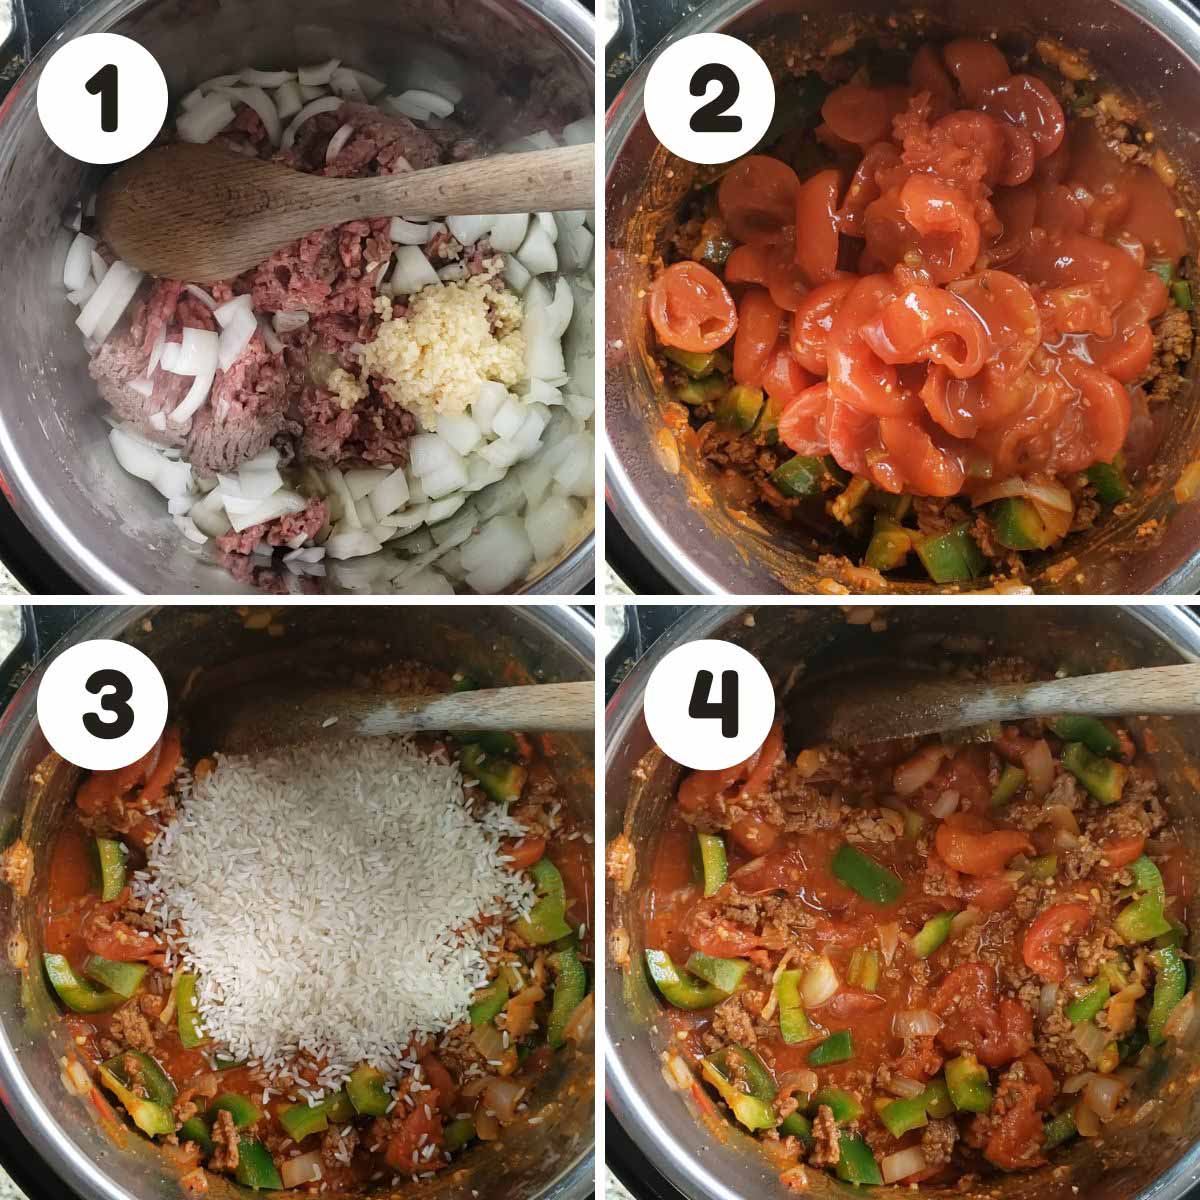 Steps to make the stuffed pepper soup.